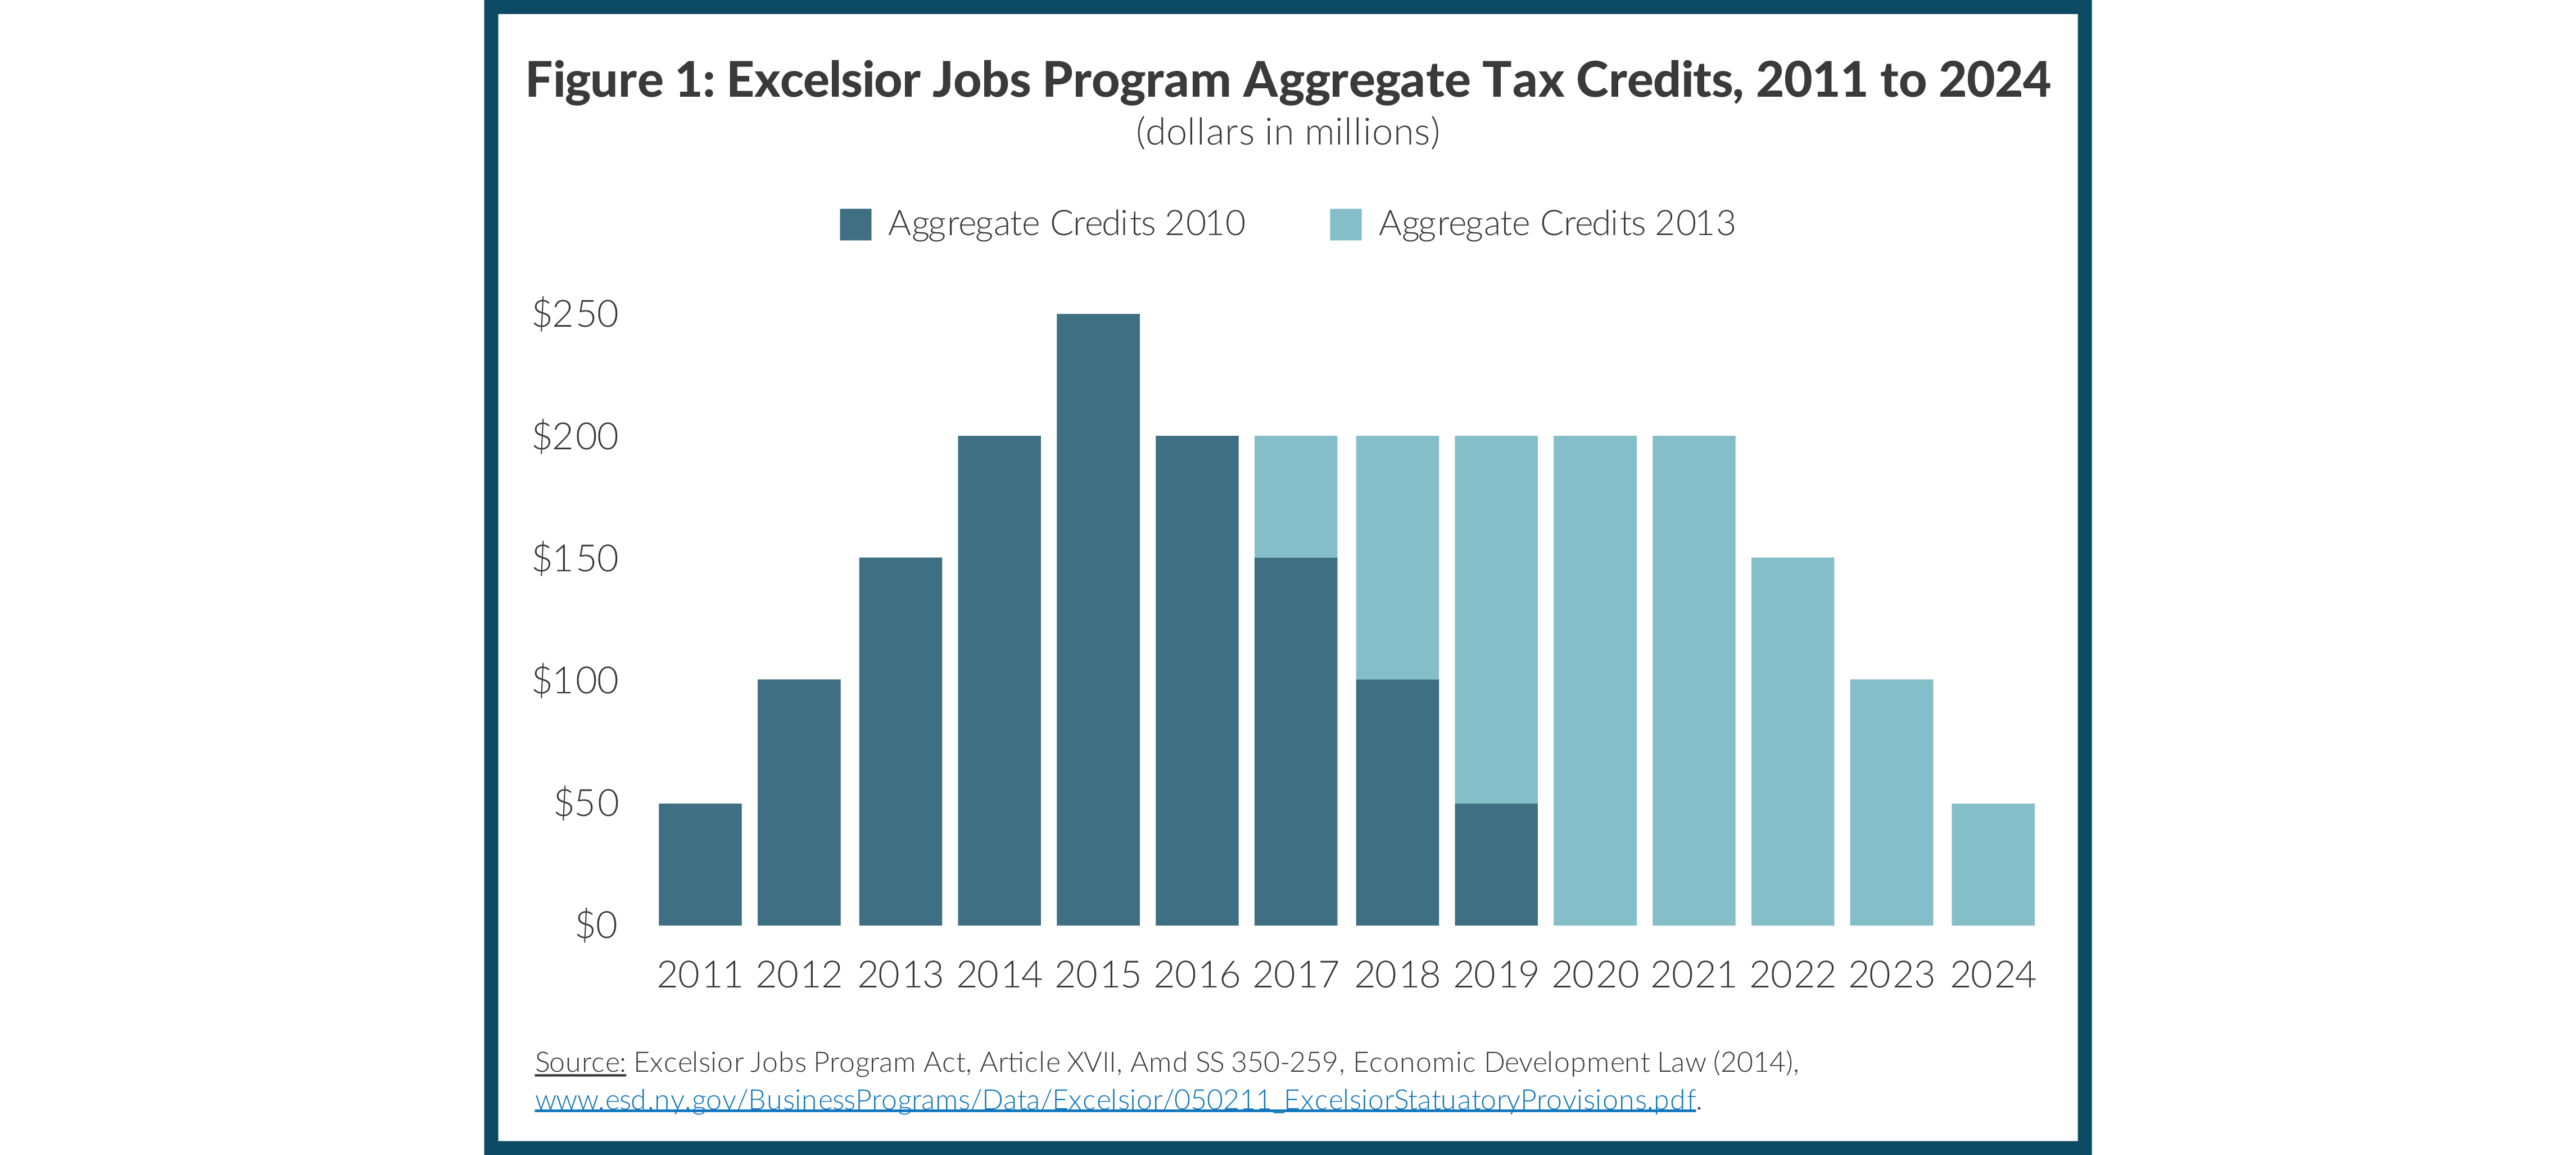 Figure 1: Excelsior Jobs Program Aggregate Tax Credits, 2011 to 2024